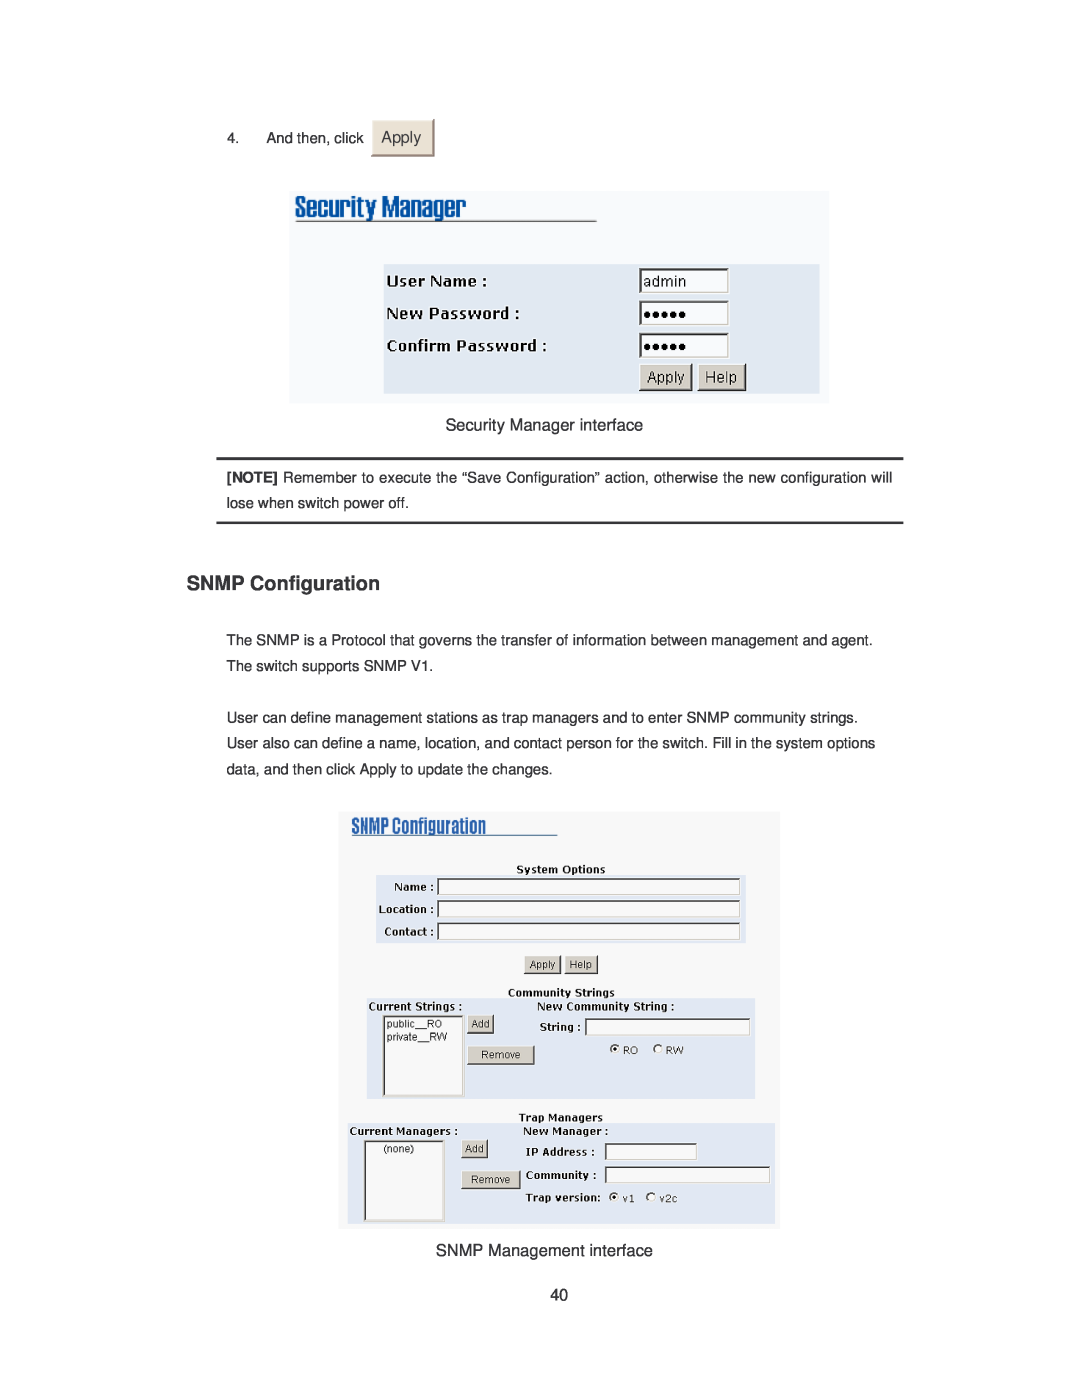 Transition Networks SISTM10XX-162-LR SNMP Configuration, Security Manager interface, SNMP Management interface, Apply 